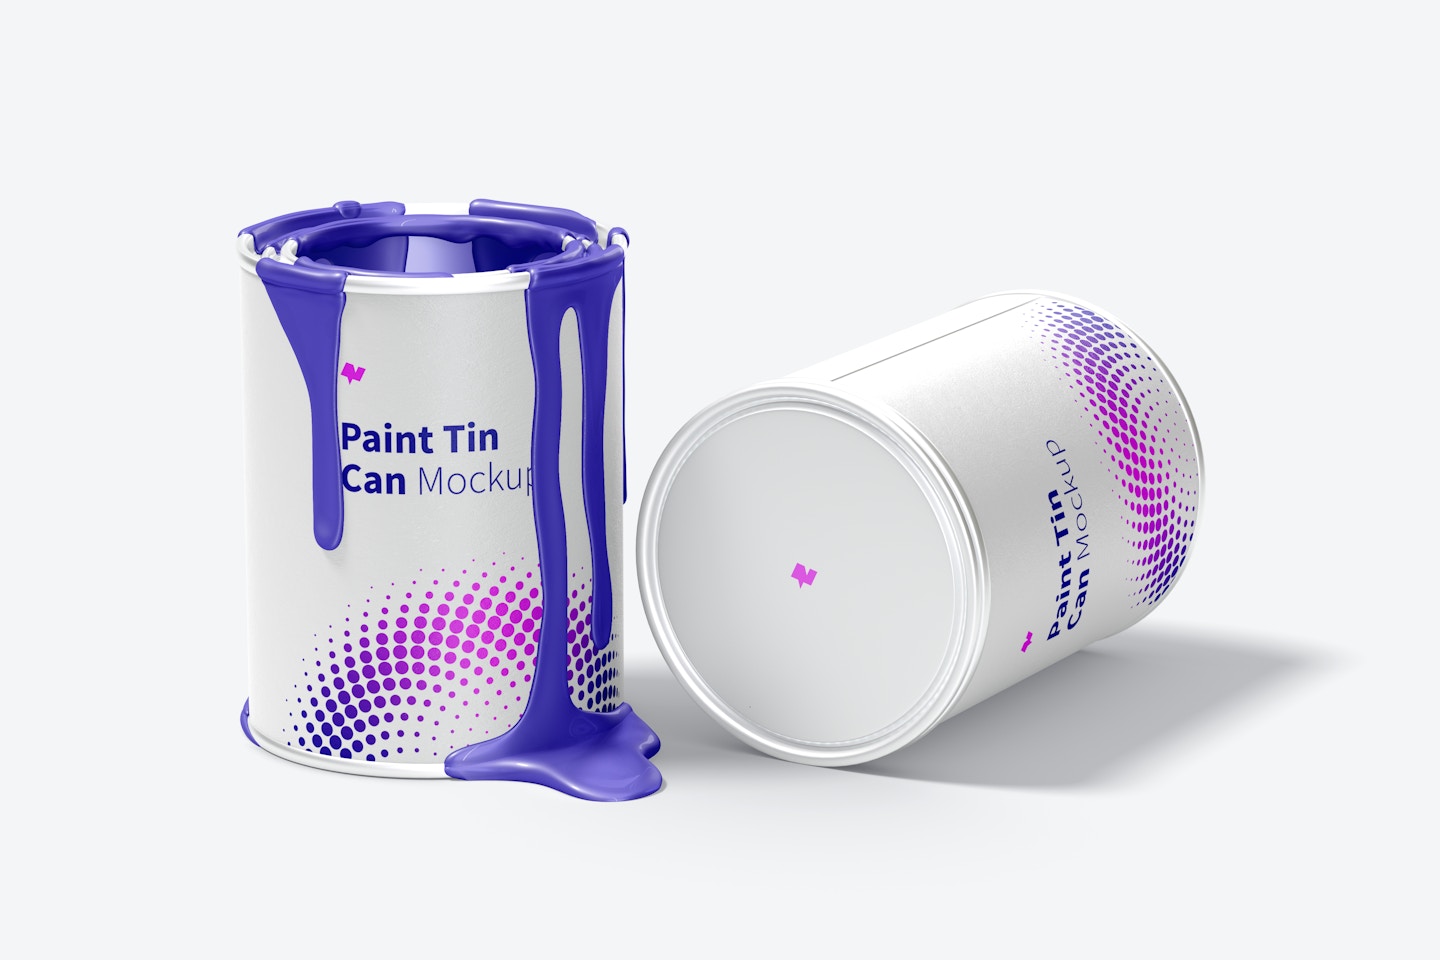 Paint Tin Cans Mockup, Opened